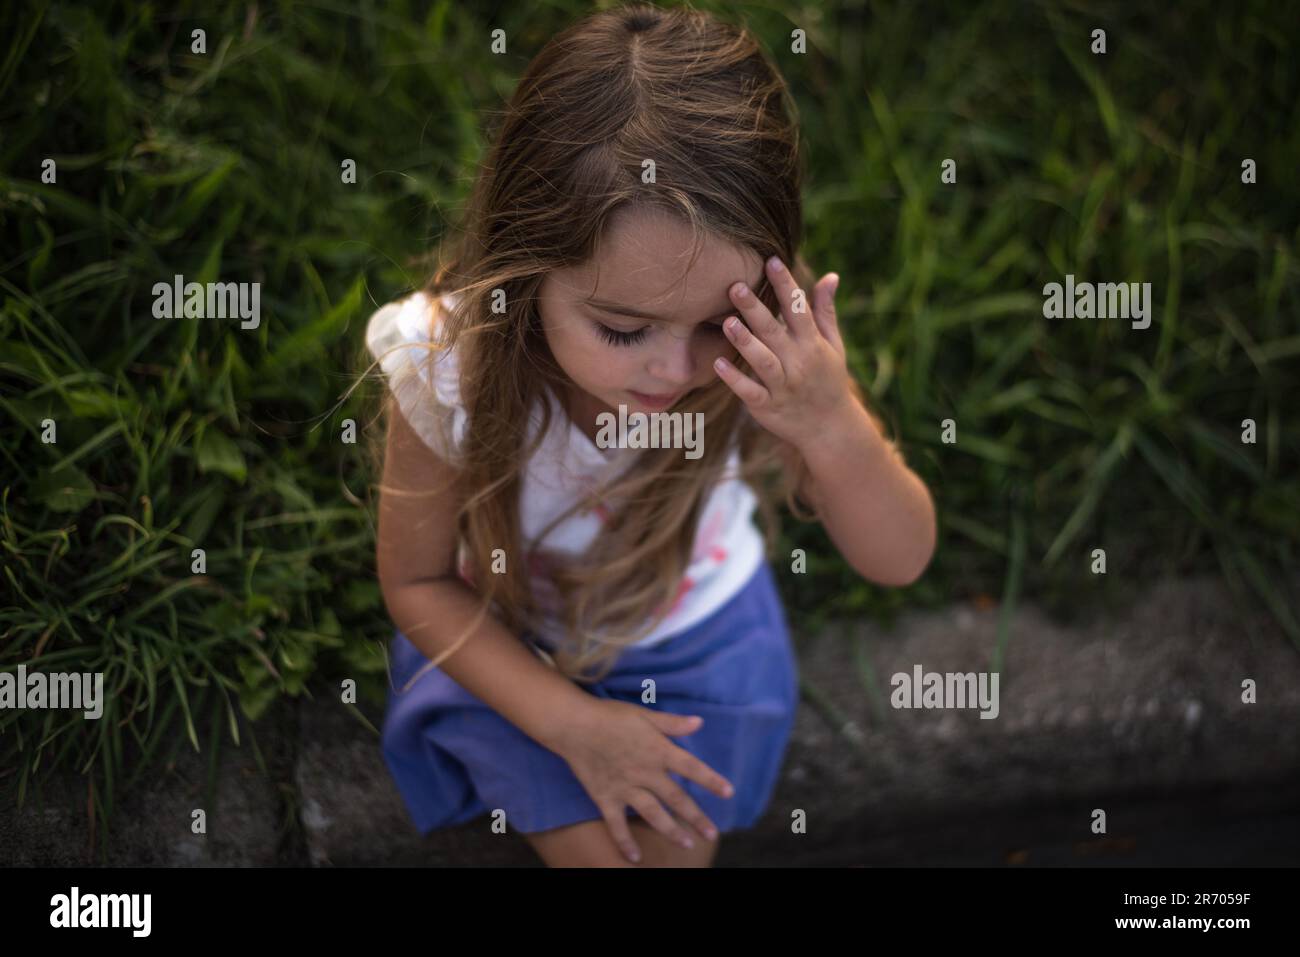 Little girl thinking with hand on forehead Stock Photo